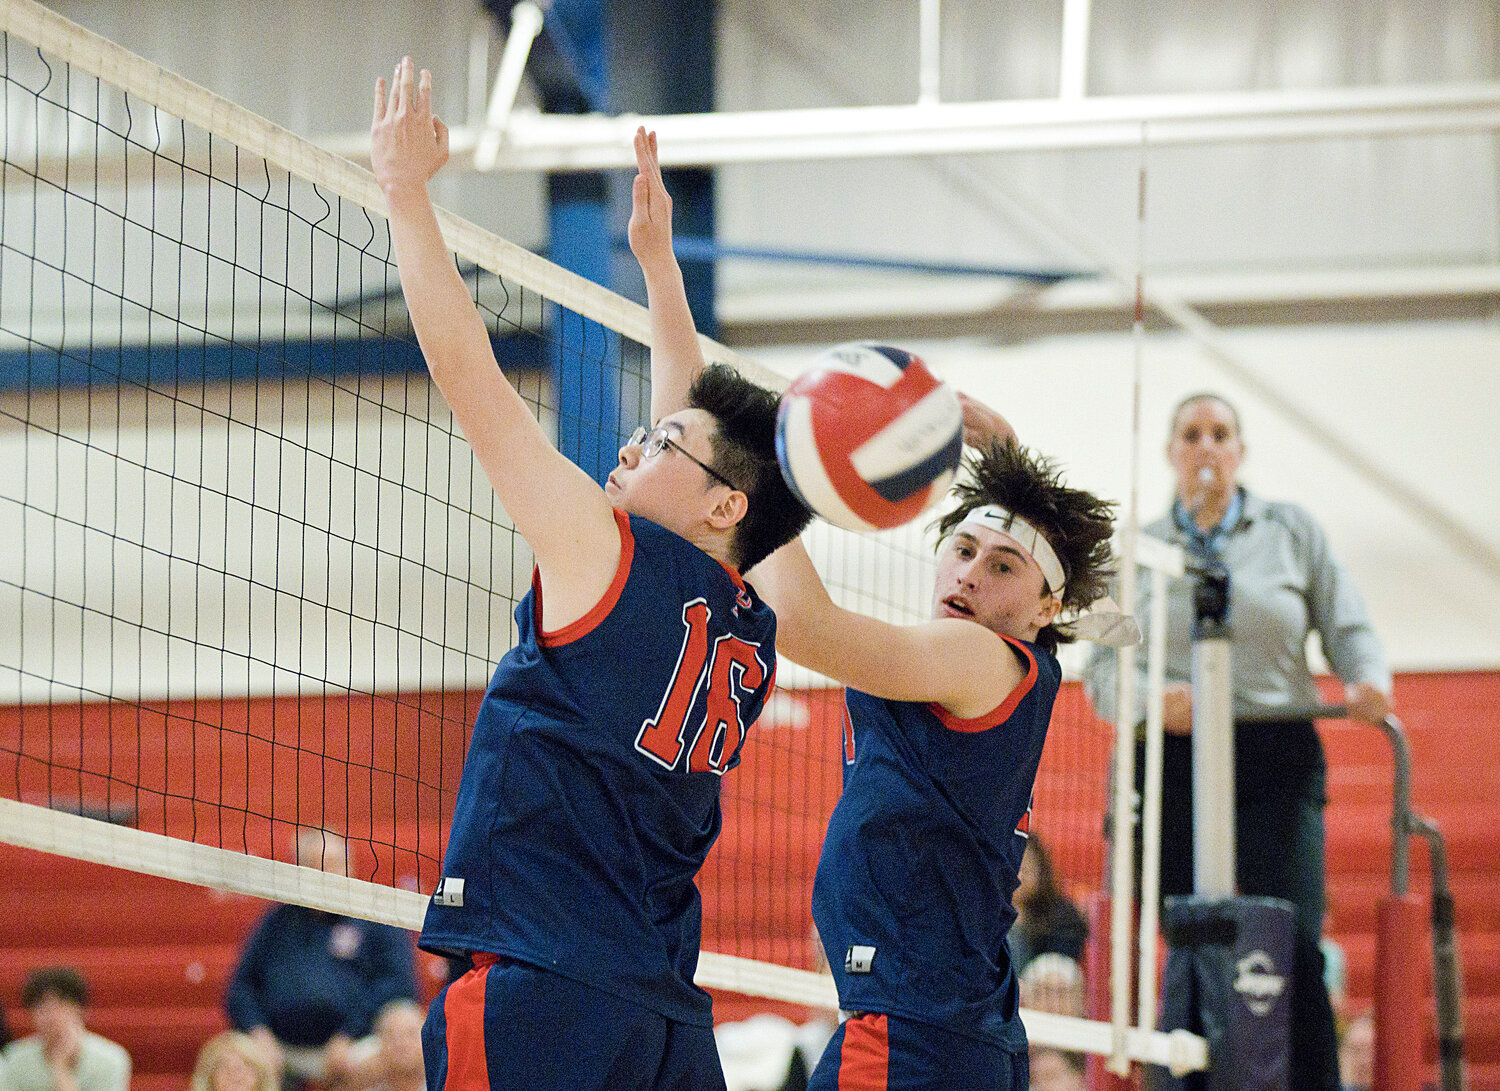 Leekey Zhang (left) and Jackson Mello look for backup as the ball comes over the net.